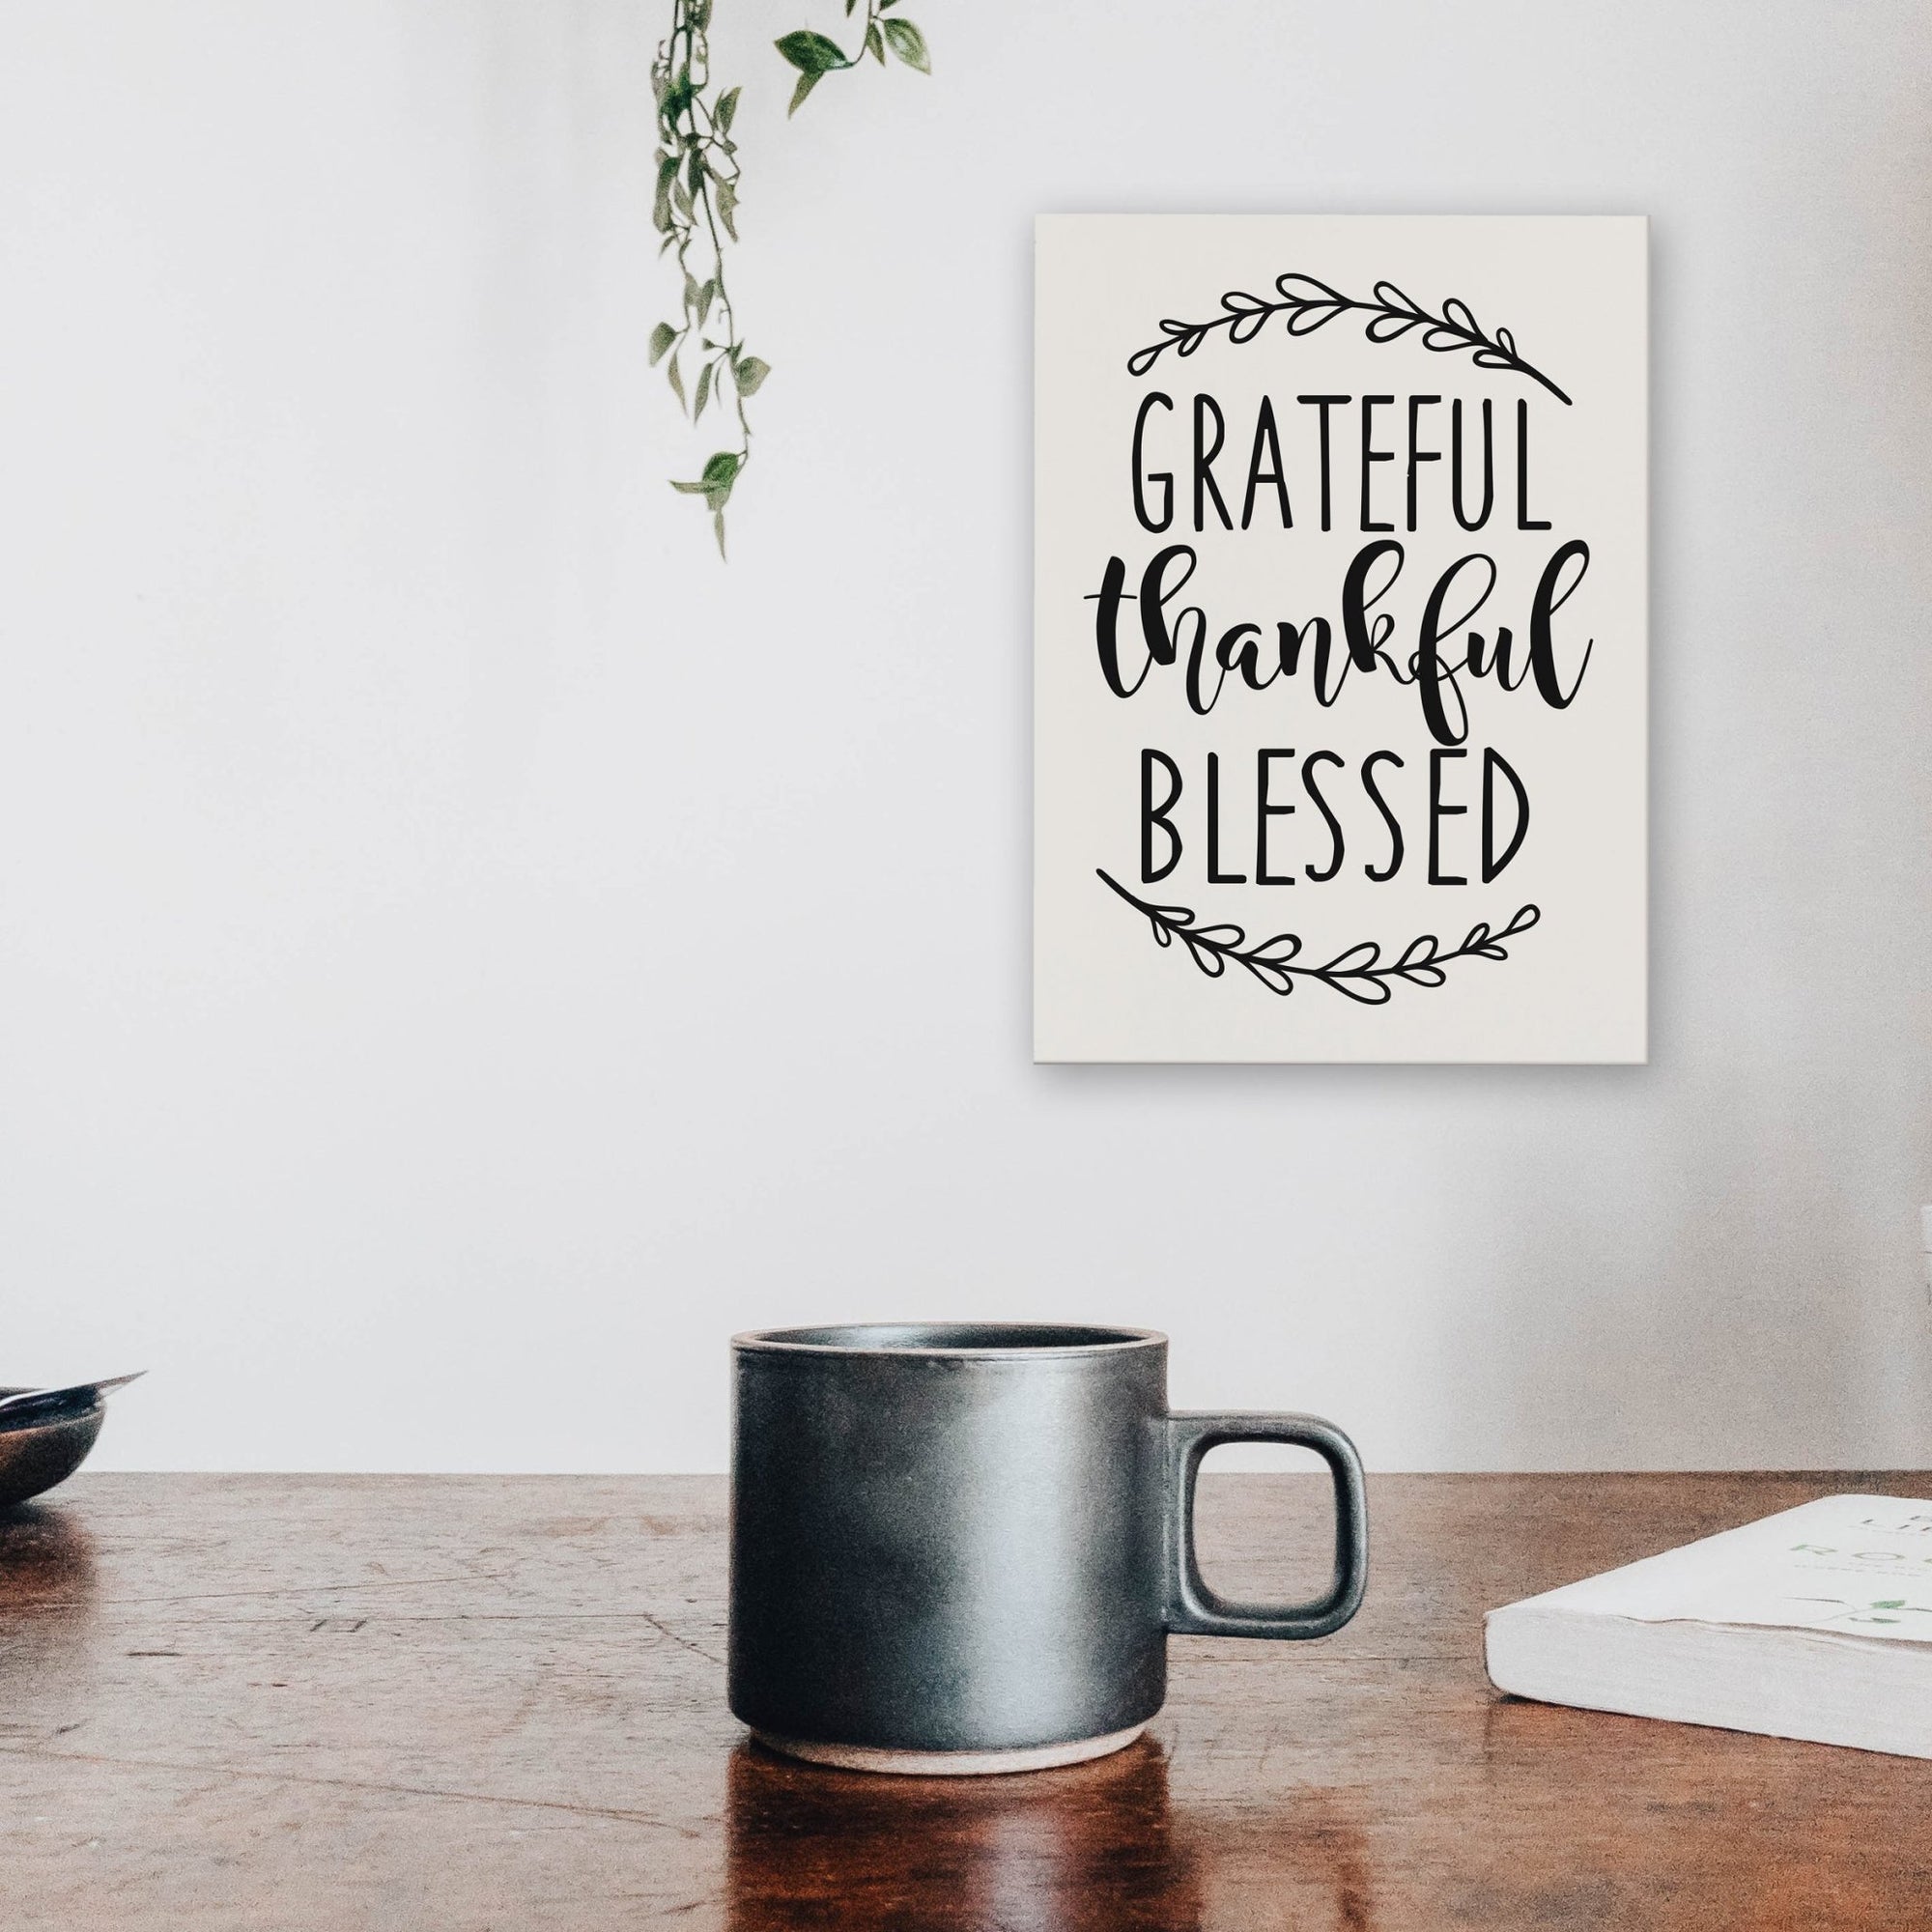 New Home Family Wall Decor Sign Gift - Grateful Thankful Blessed - LifeSong Milestones